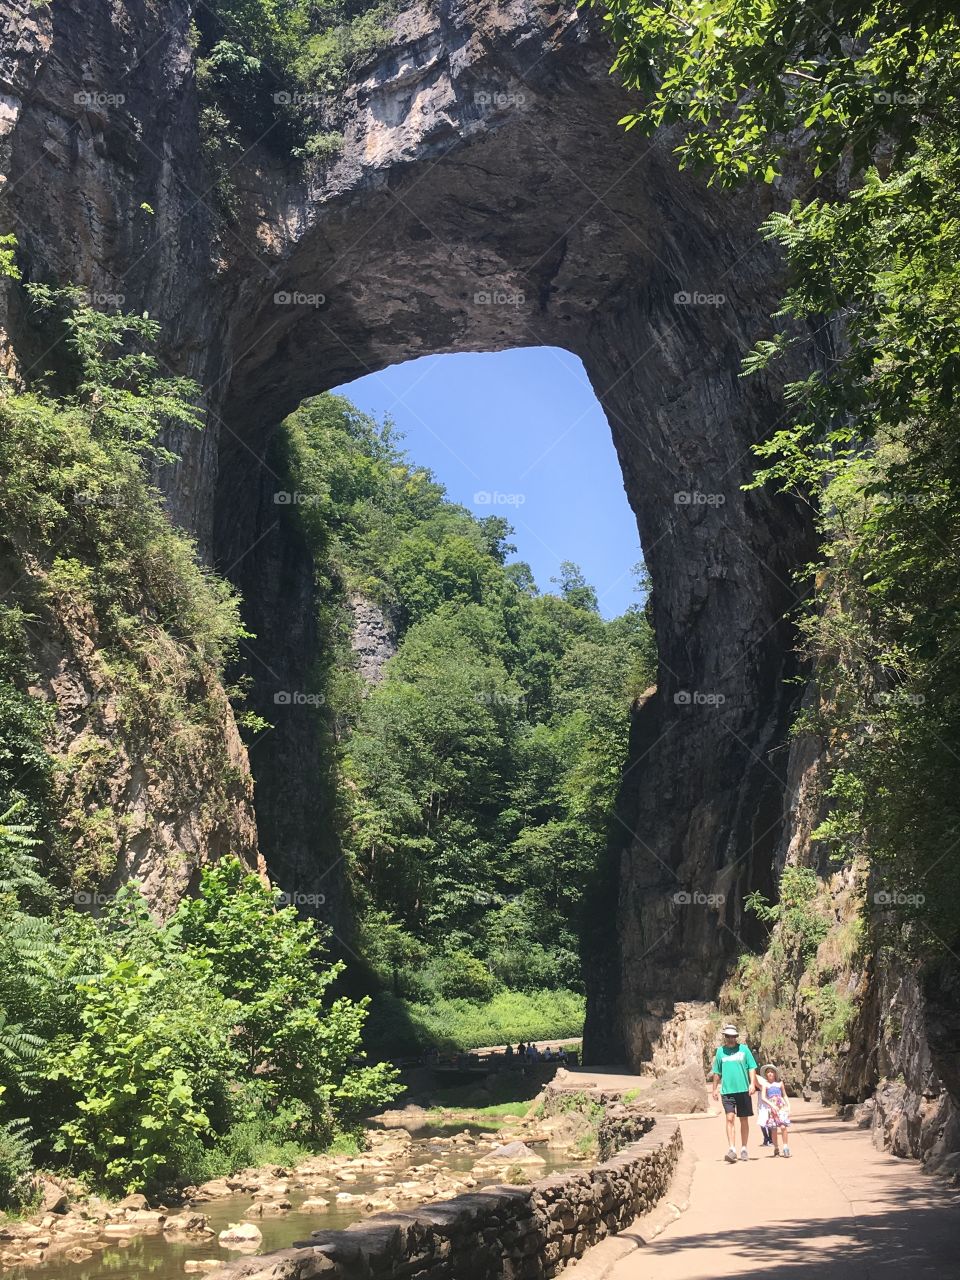 The view of Natural Bridge from the ground is stunning, reminding us that nature can do anything